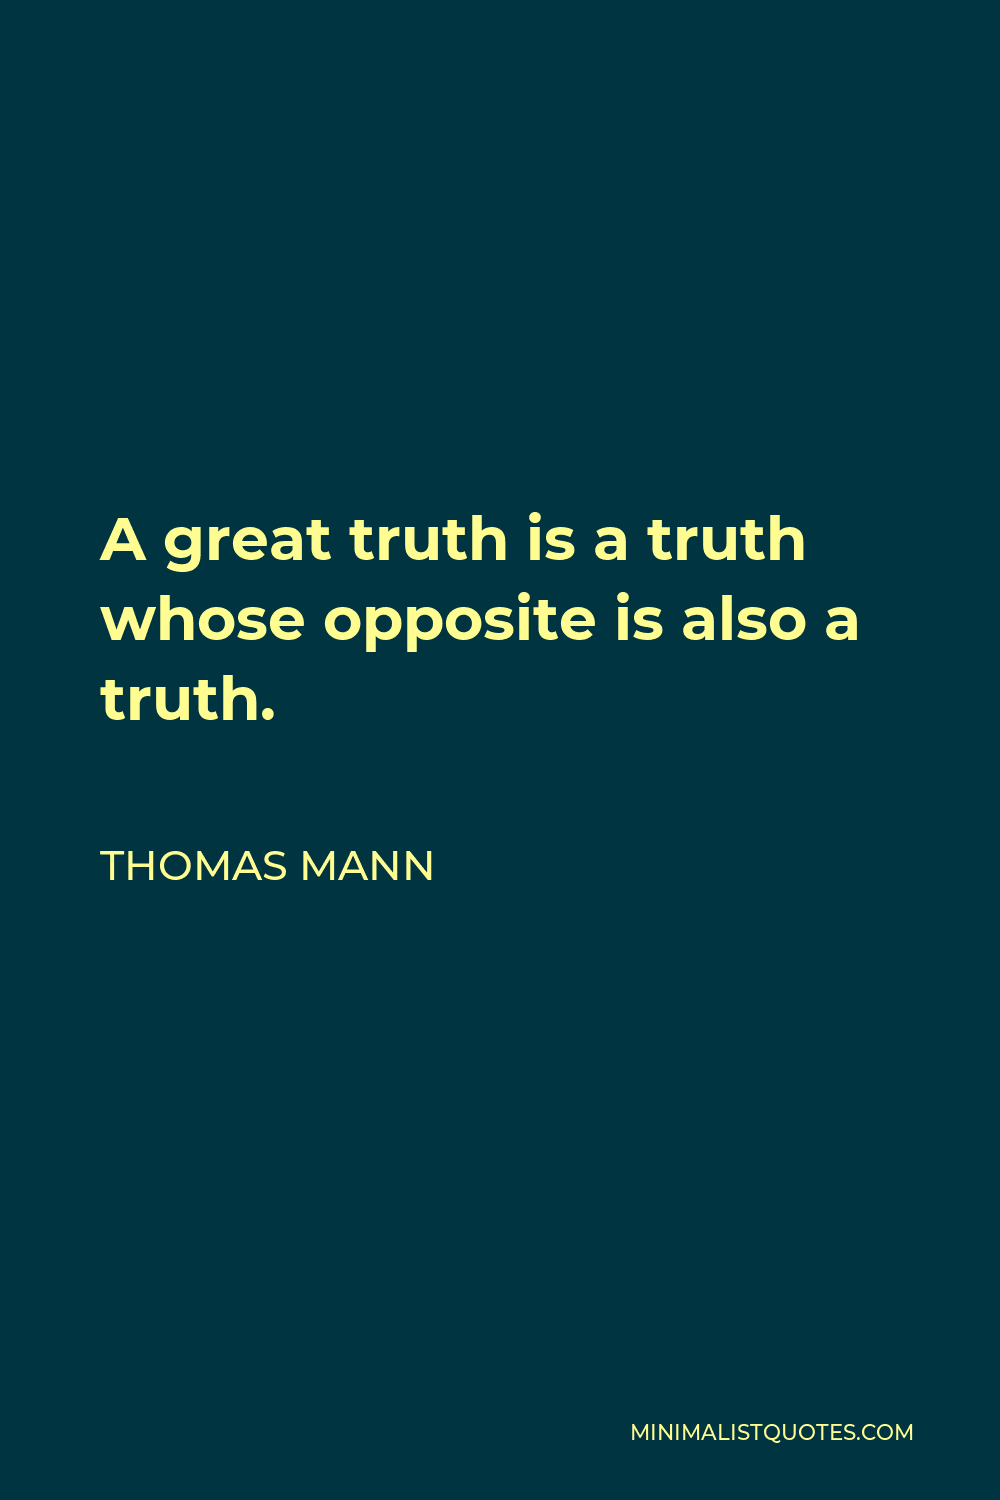 Thomas Mann Quote - A great truth is a truth whose opposite is also a truth.